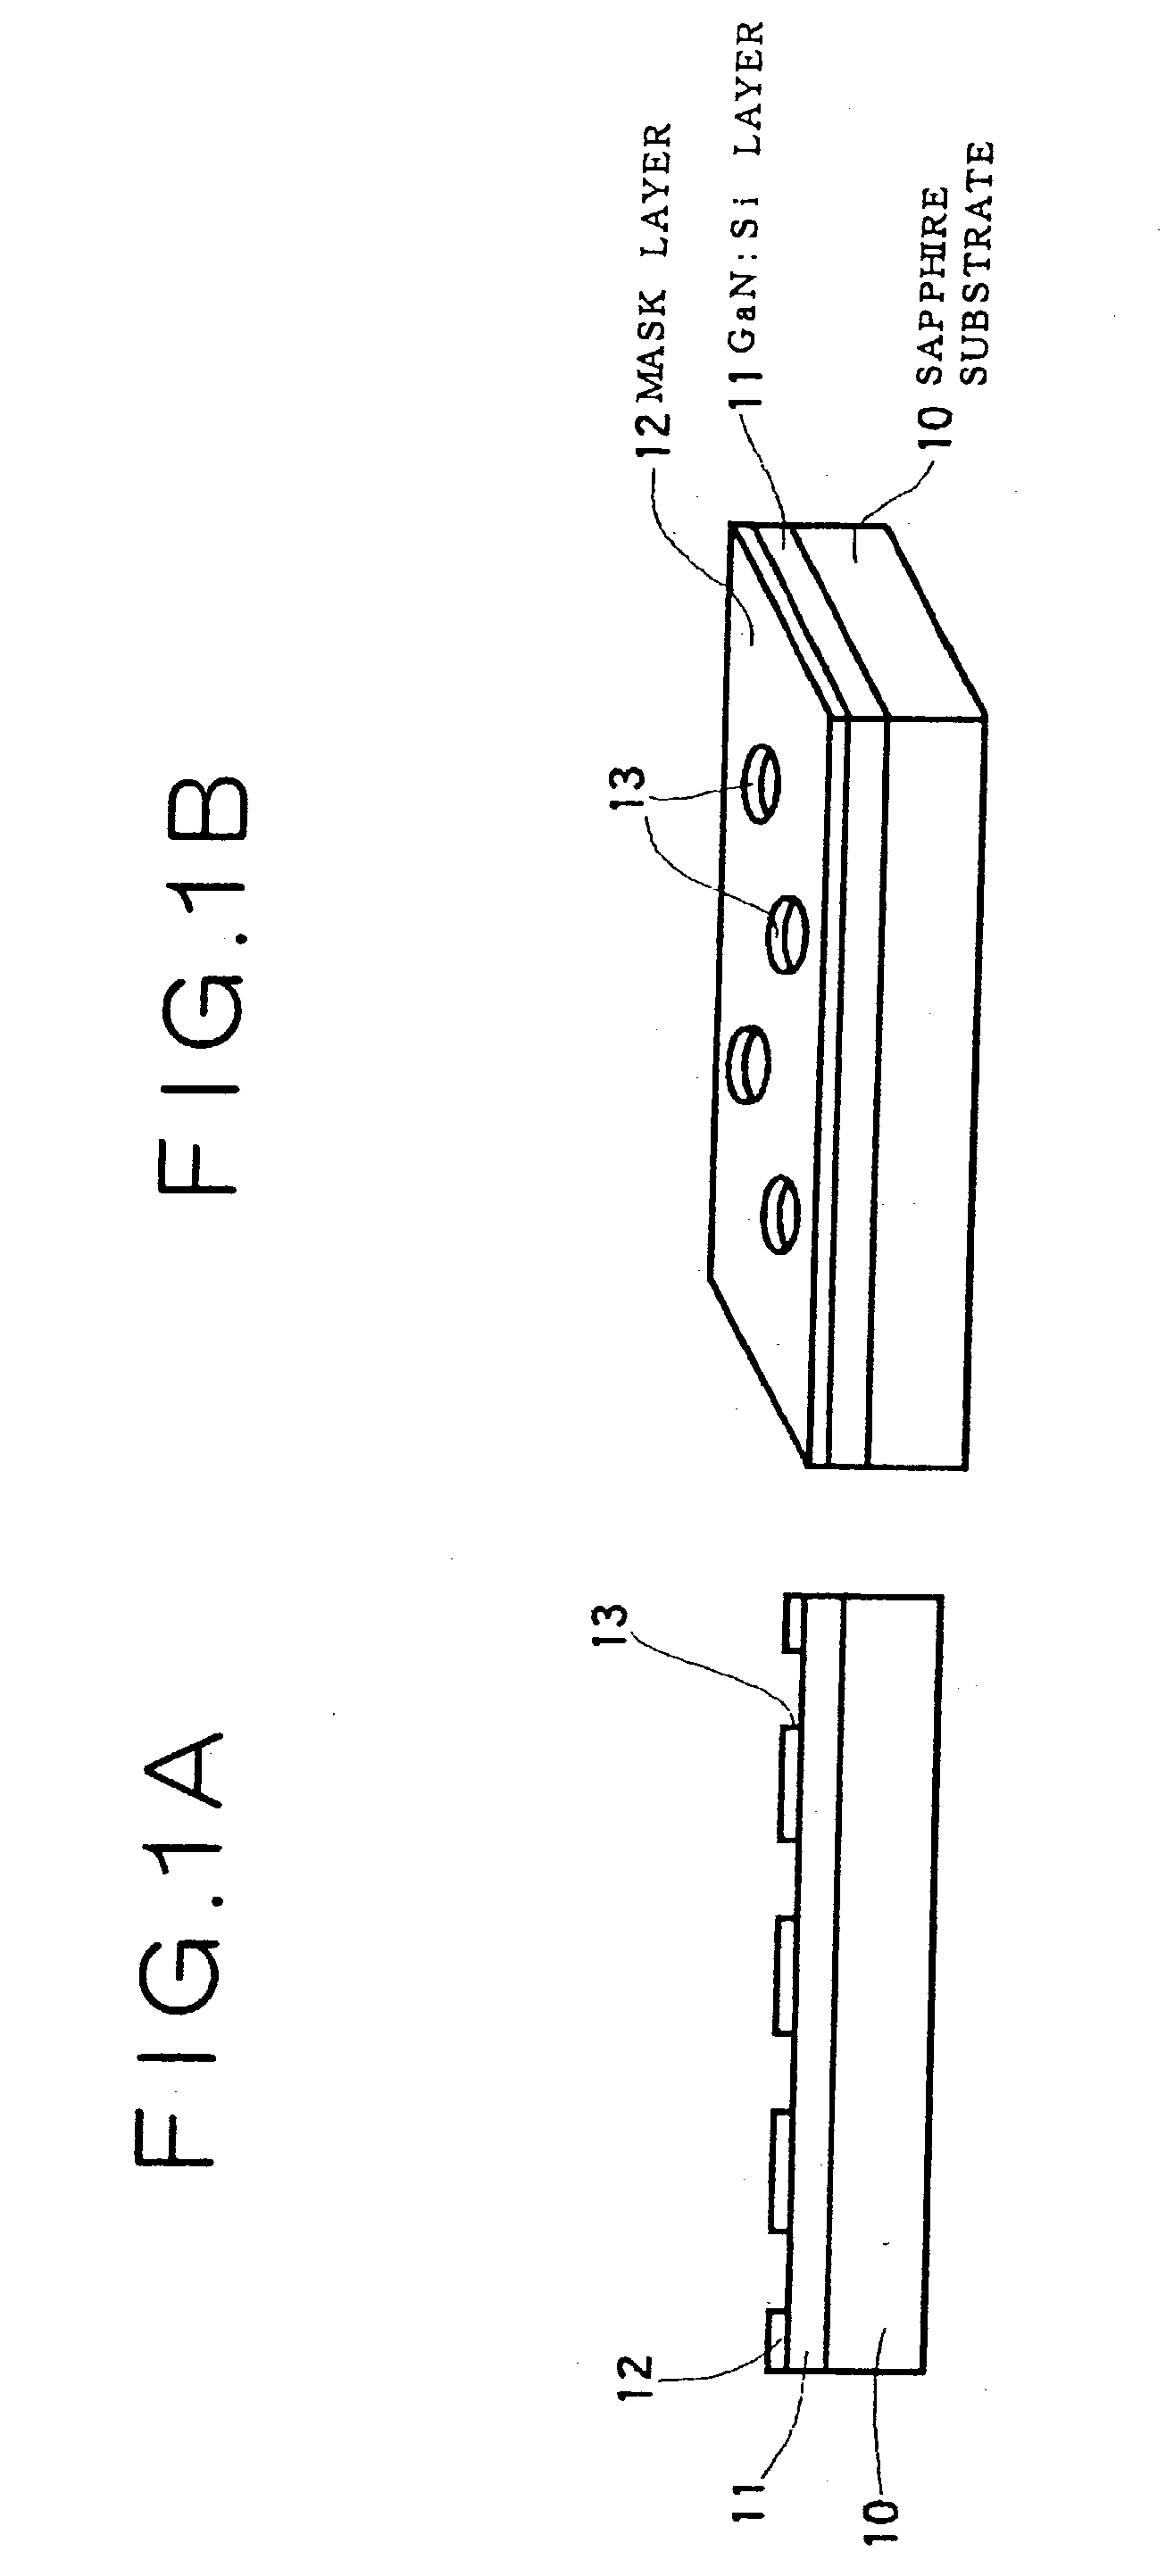 Semiconductor light-emitting device and semiconductor light-emitting apparatus